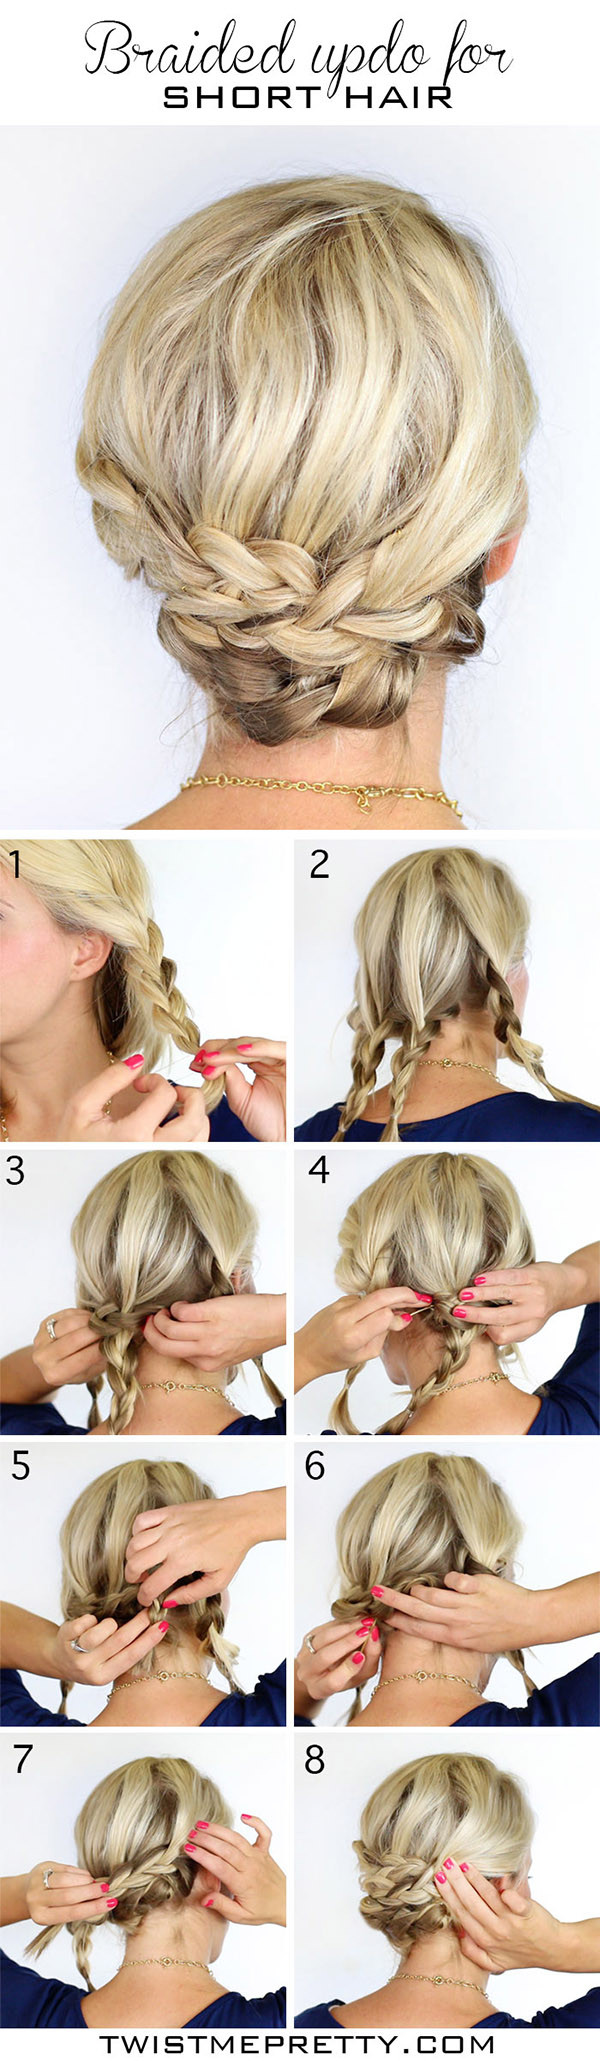 DIY Hairstyle For Short Hair
 20 DIY Wedding Hairstyles With Tutorials To Try Your Own